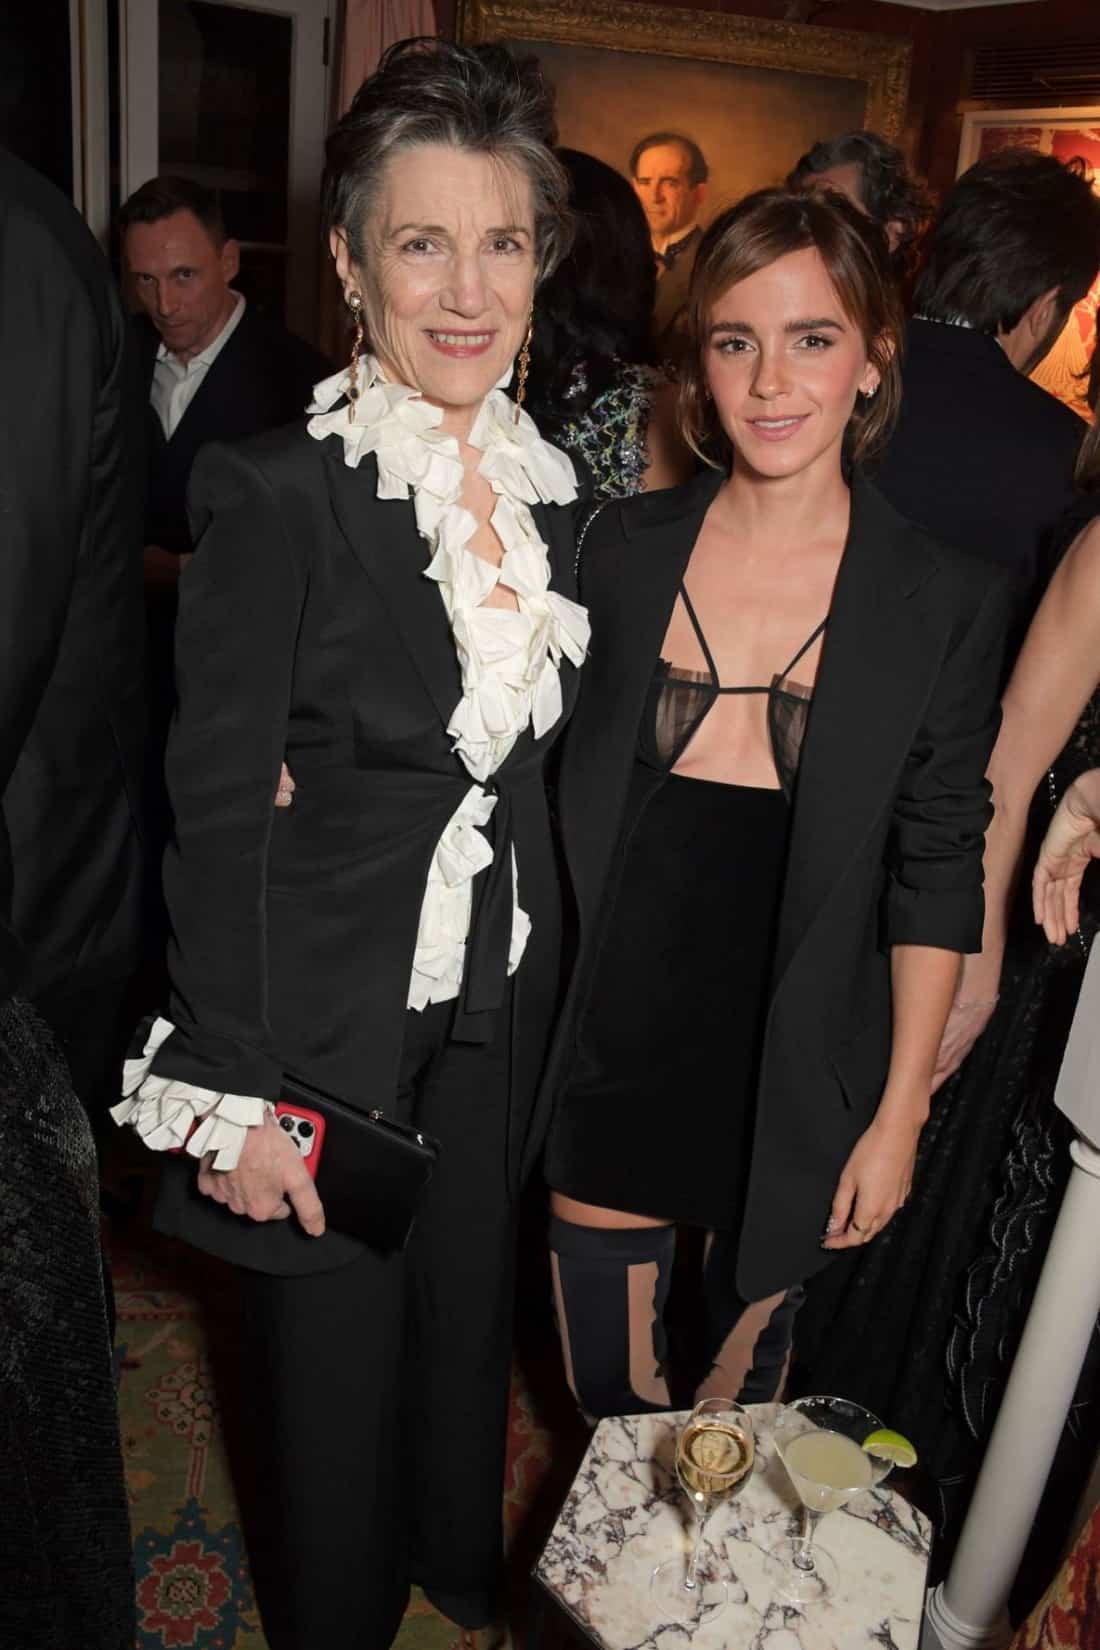 Emma Watson Wore Lace Bra and High Boots at Charles Finch X Chanel Pre-BAFTA Dinner In London